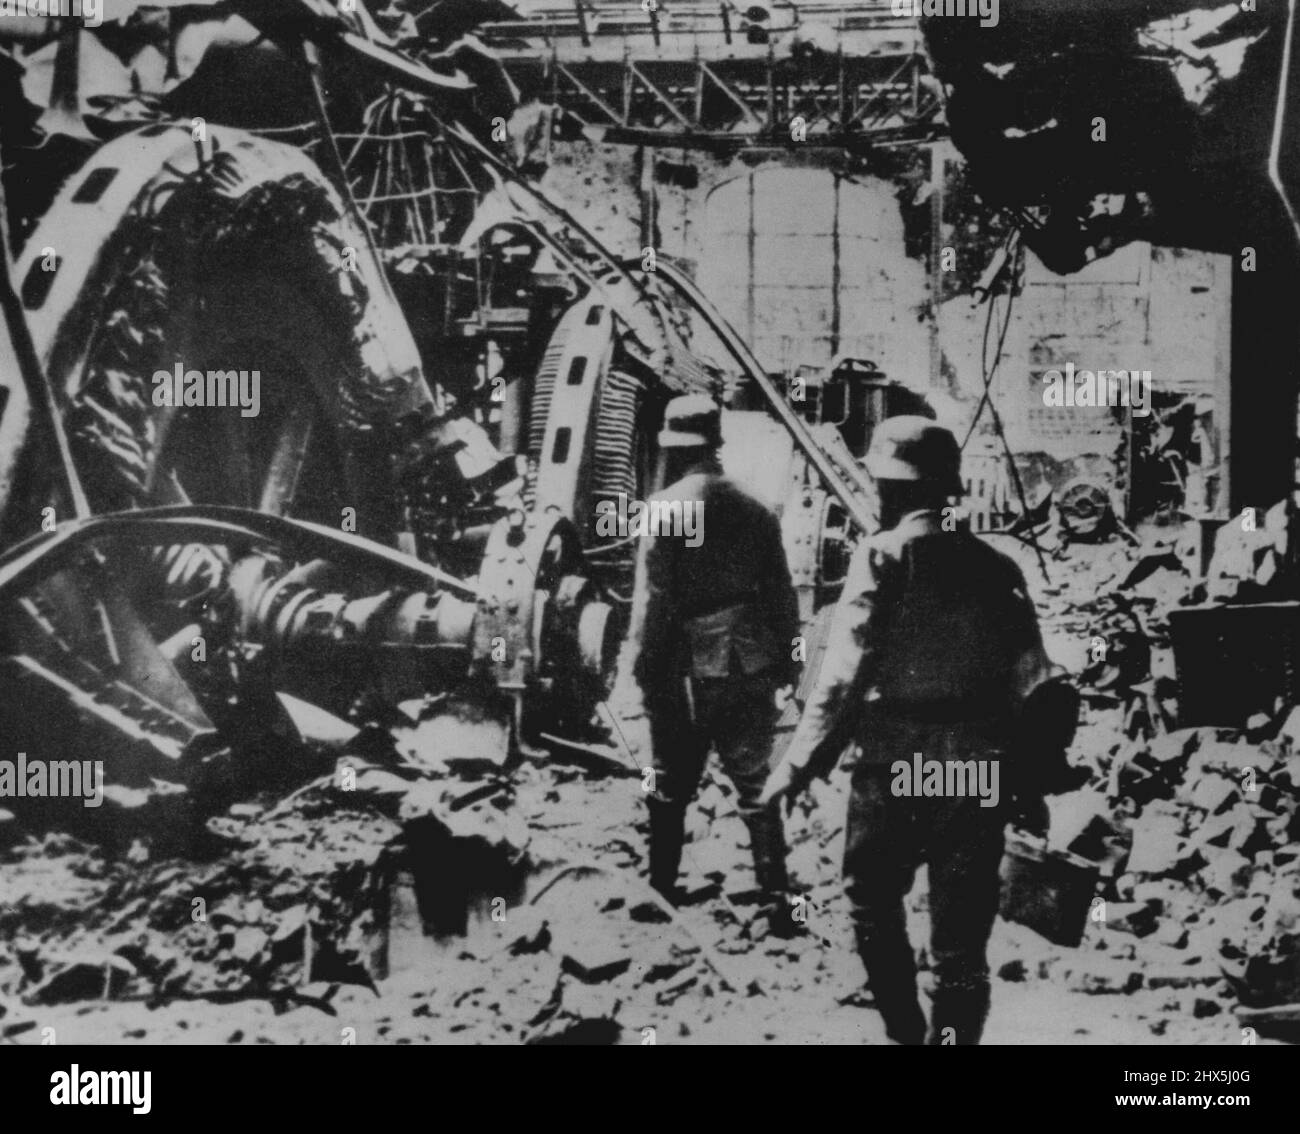 Nazis Inspect Stalingrad Damage -- German soldiers examine wrecked German made generators in a damaged Stalingrad power plant according to the German captions accompanying this picture which arrived here today from Lisbon. January 9, 1943. (Photo by AP Wirephoto). Stock Photo